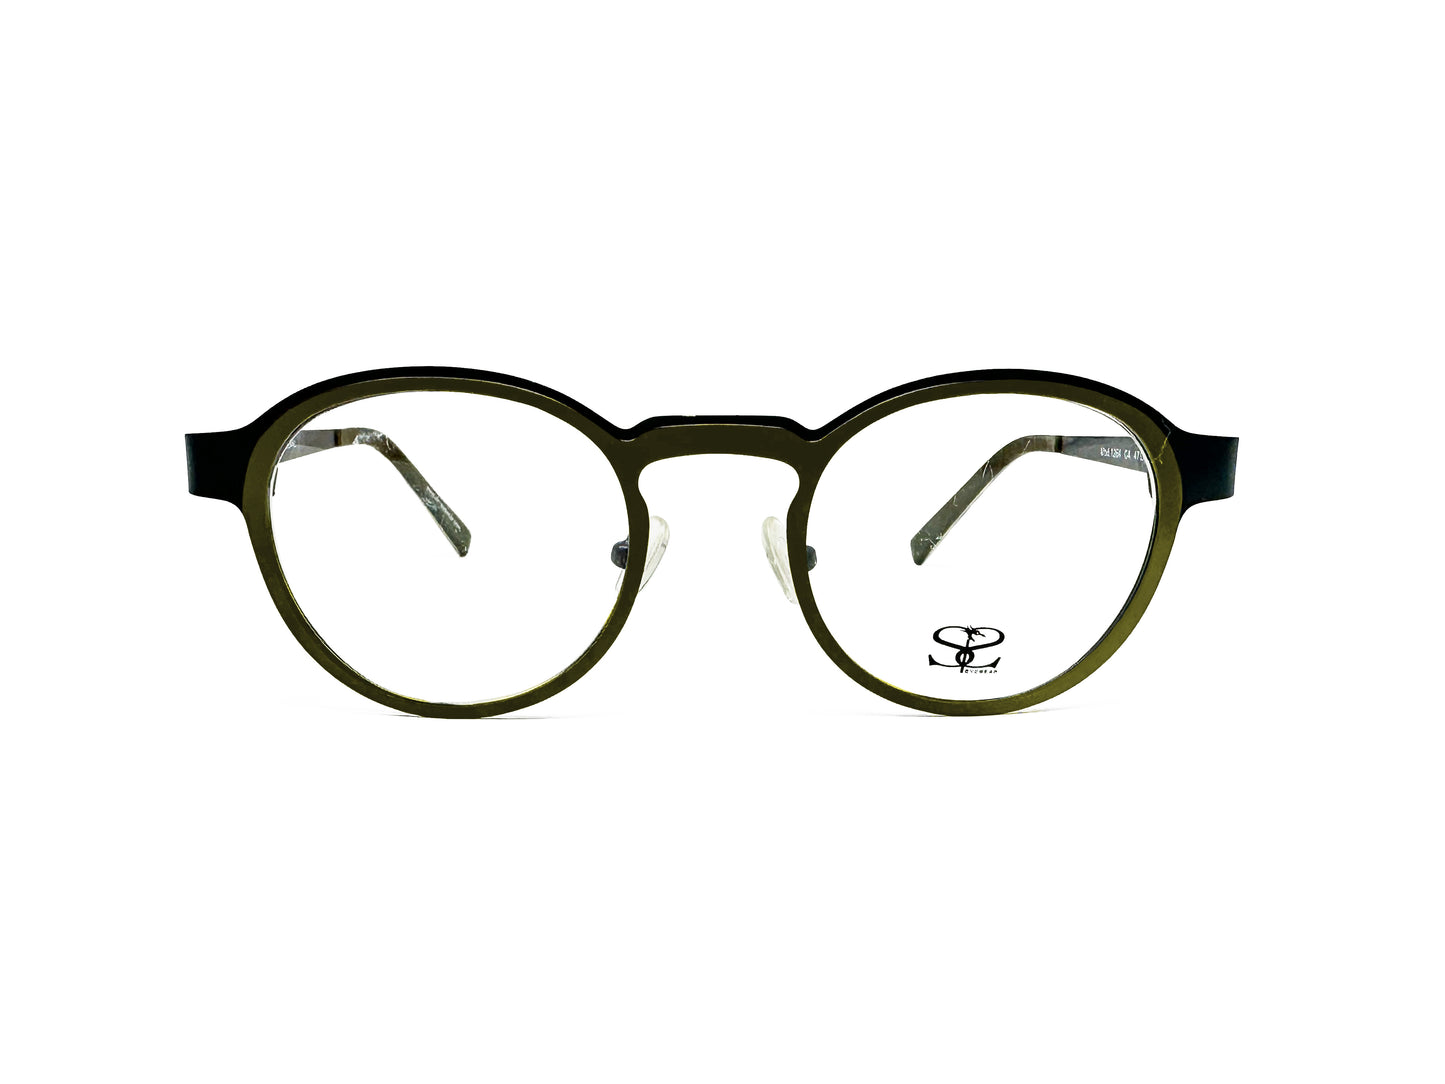 Social Eyes rouned, metal optical frame with keyhole bridge. Model: 1264. Color: C4 - Dark Olive with Black. front view. 